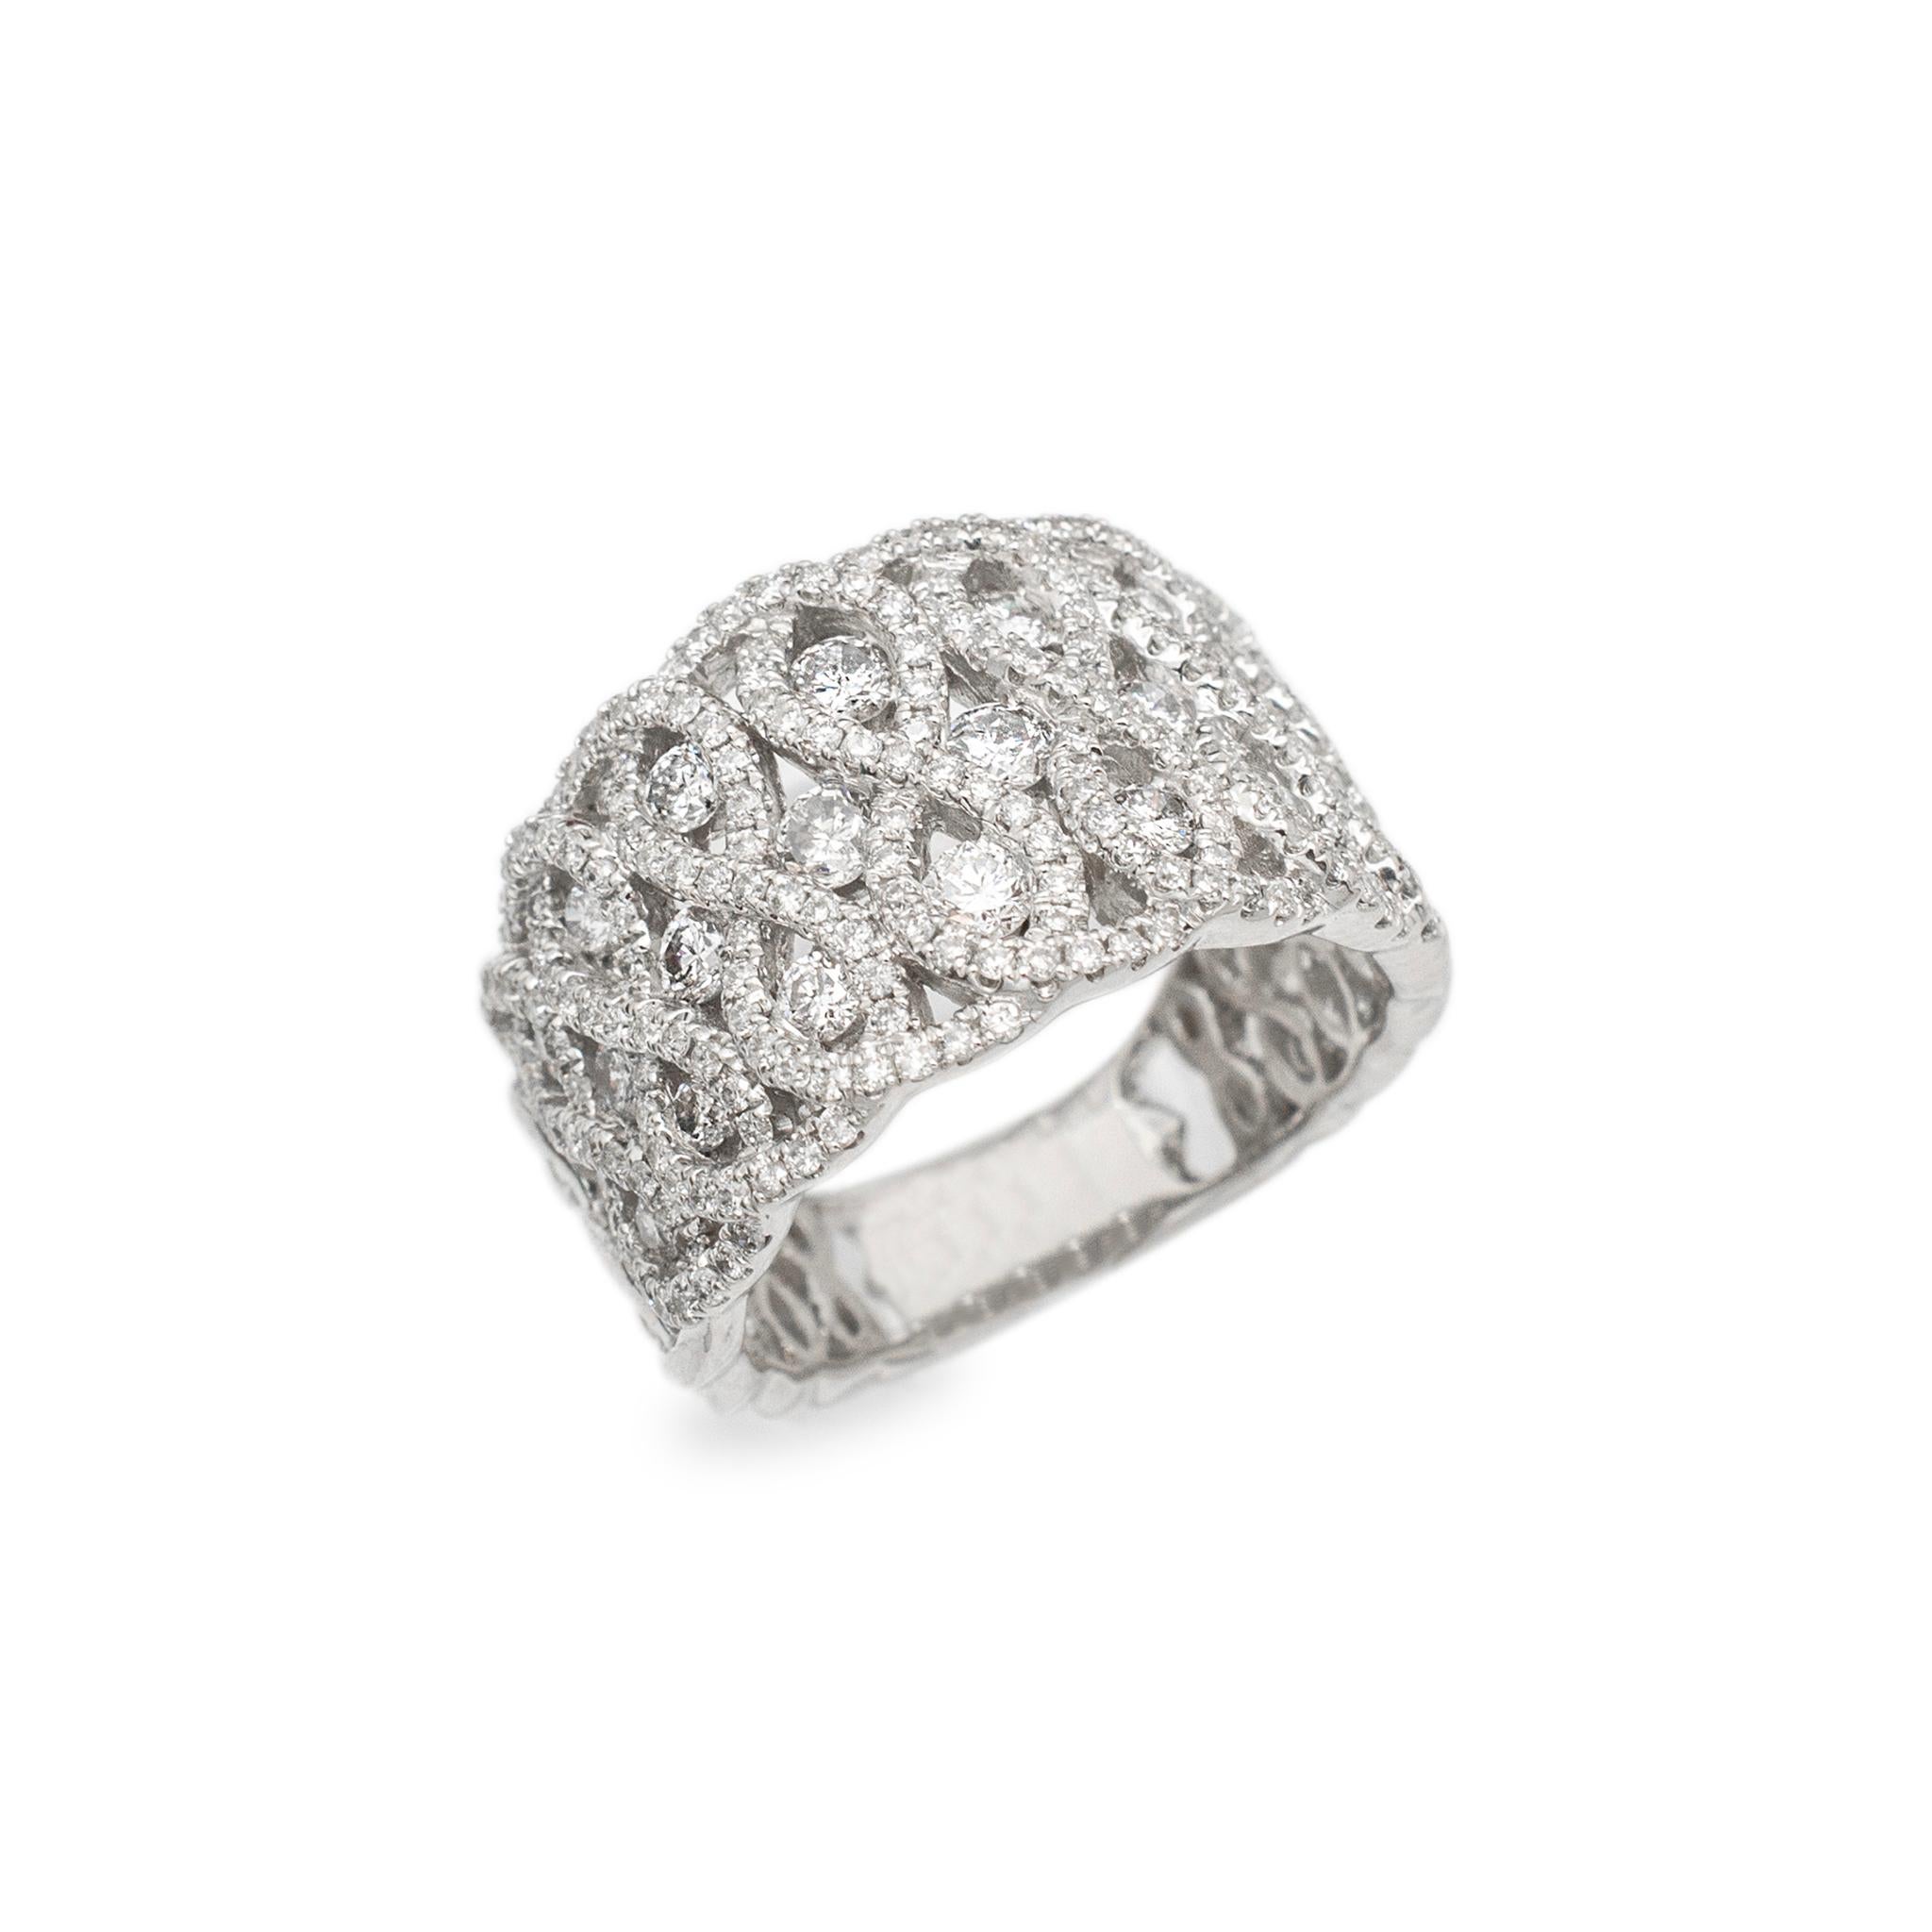 Gender: Ladies

Metal Type: 18K White Gold

Size: 7

Shank Maximum Width: 14.30 mm tapering to 4.95 mm

Weight: 10.20 grams

Ladies 18K white gold diamond cluster band with a half-round shank. The metal was tested and determined to be 18K white